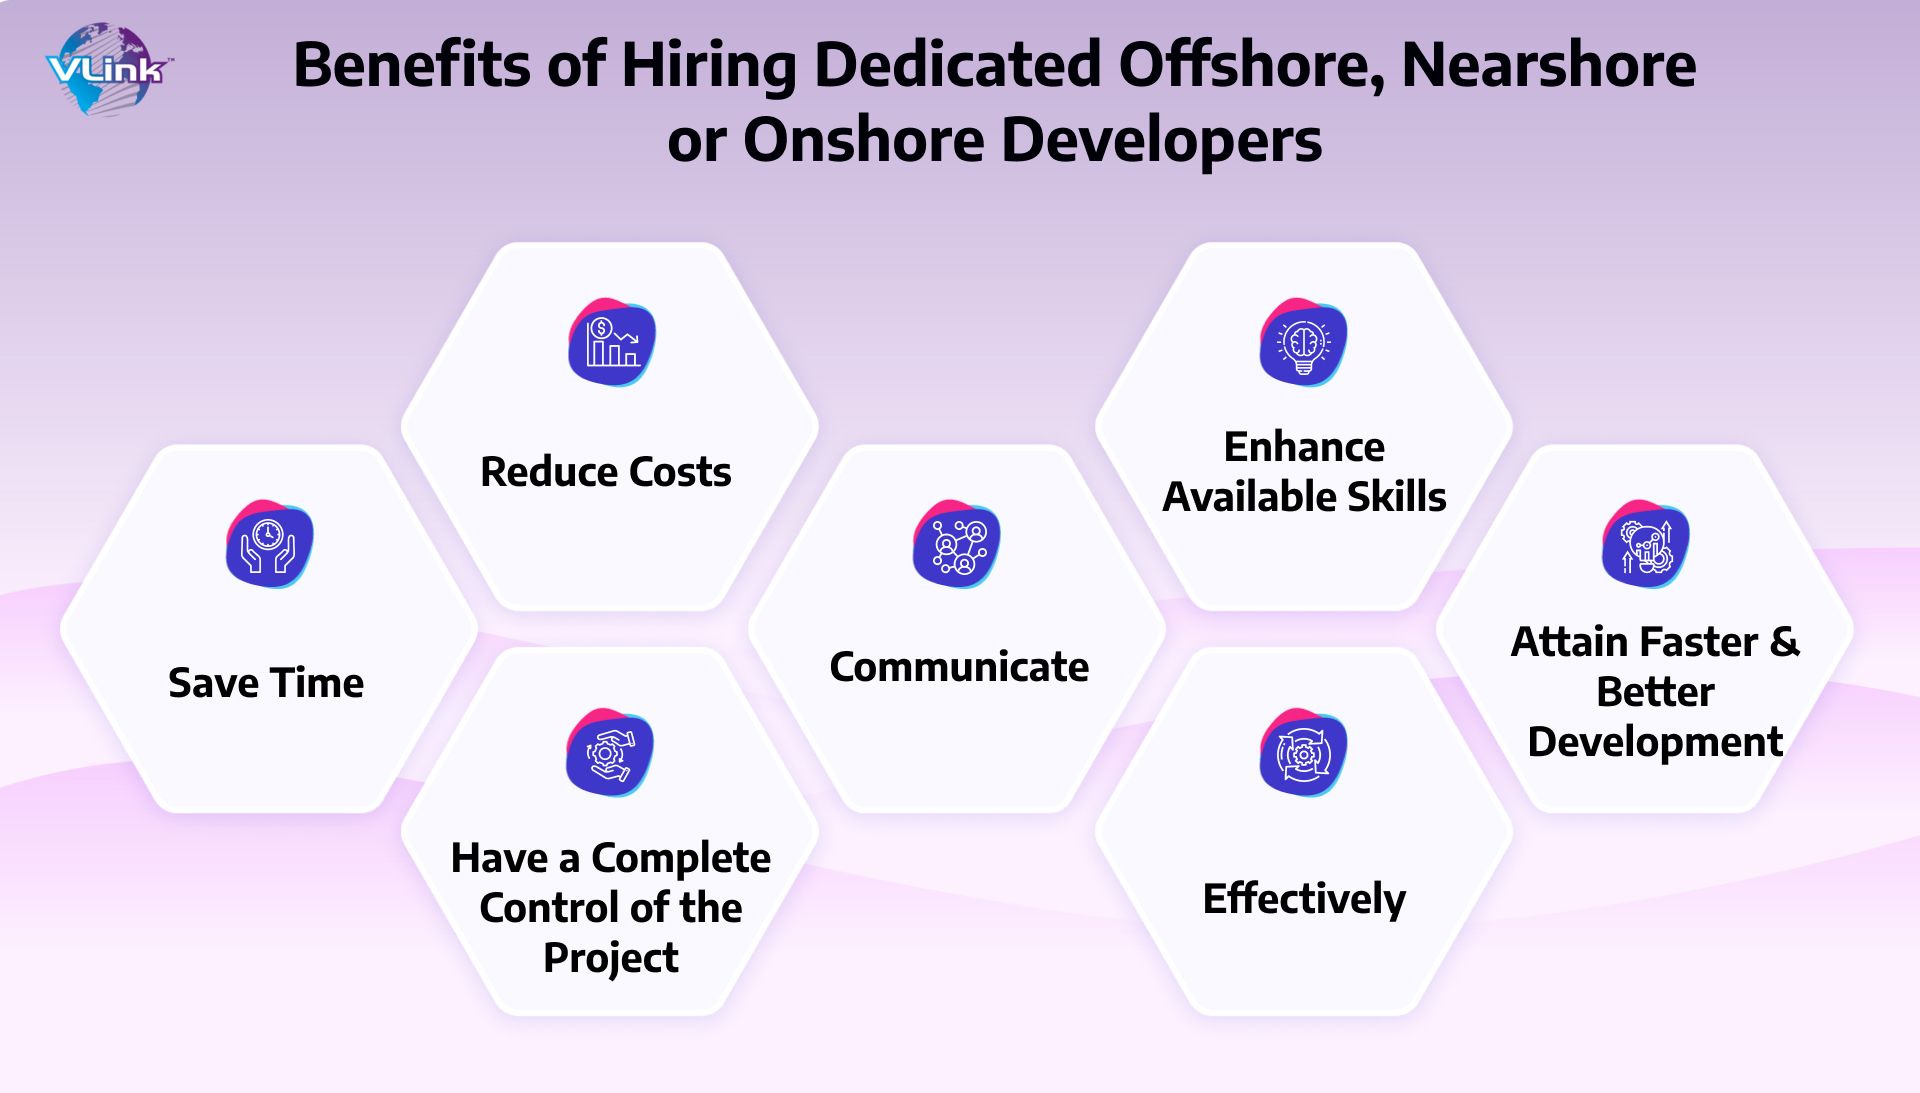 Benefits of Hiring Dedicated Offshore, Nearshore, or Onshore Developers